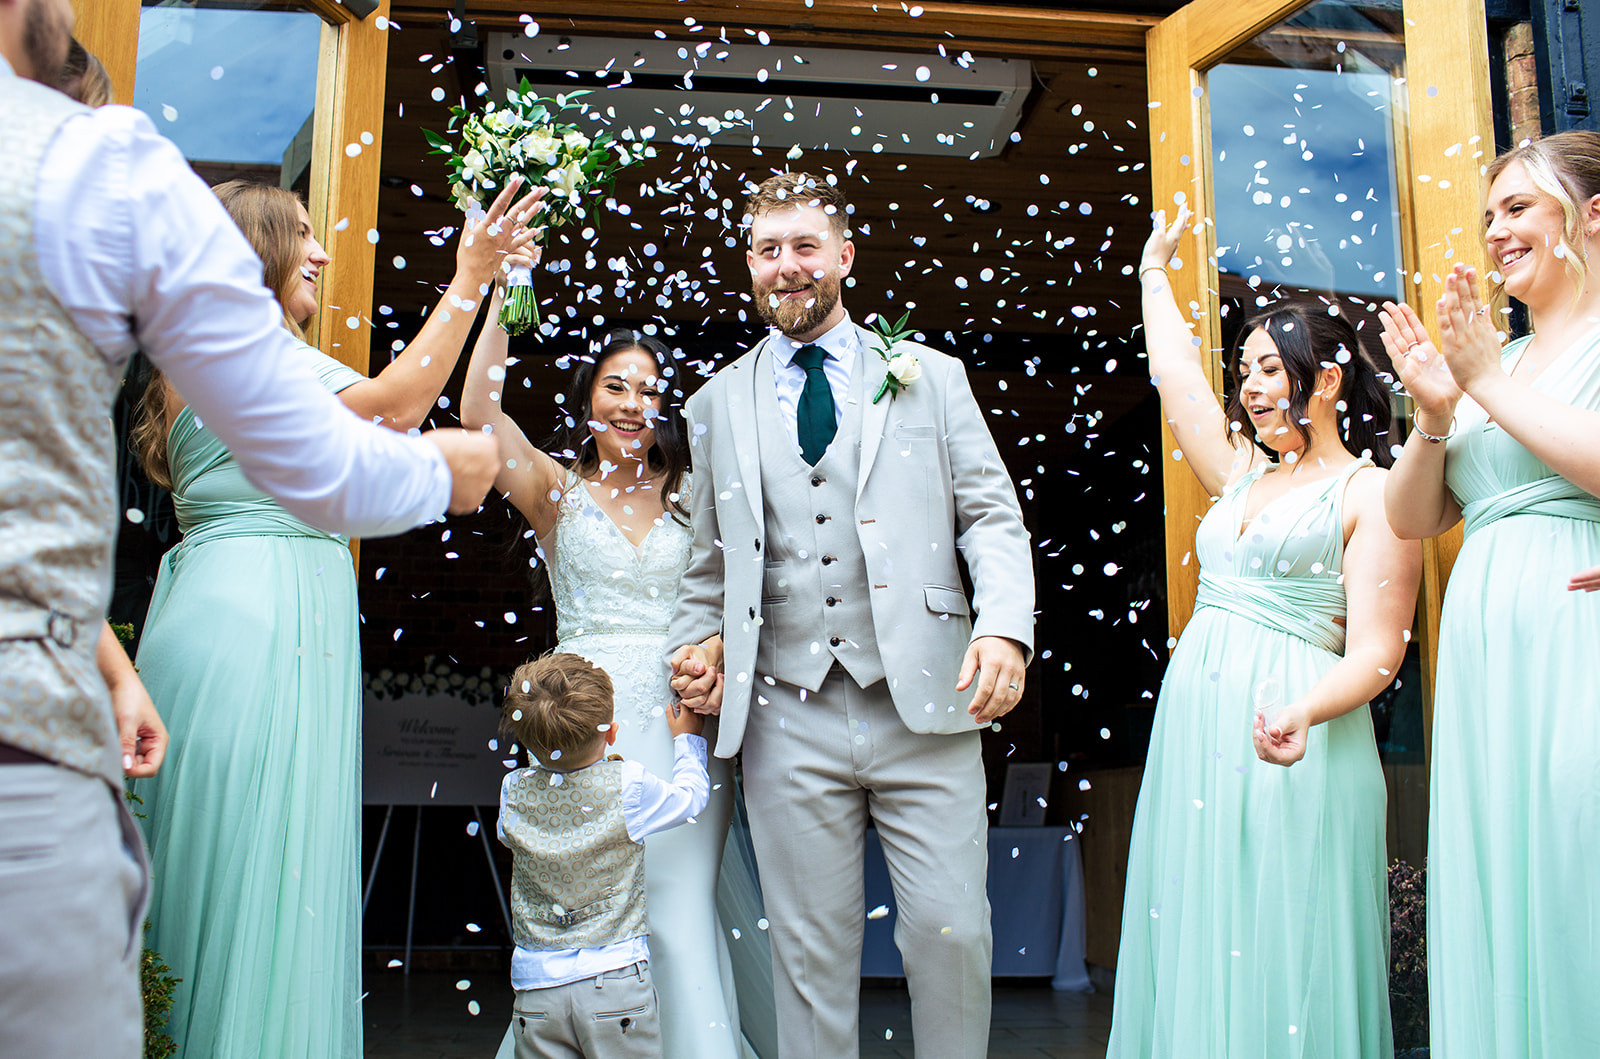 Wedding couple walking out with white confetti thrown at them